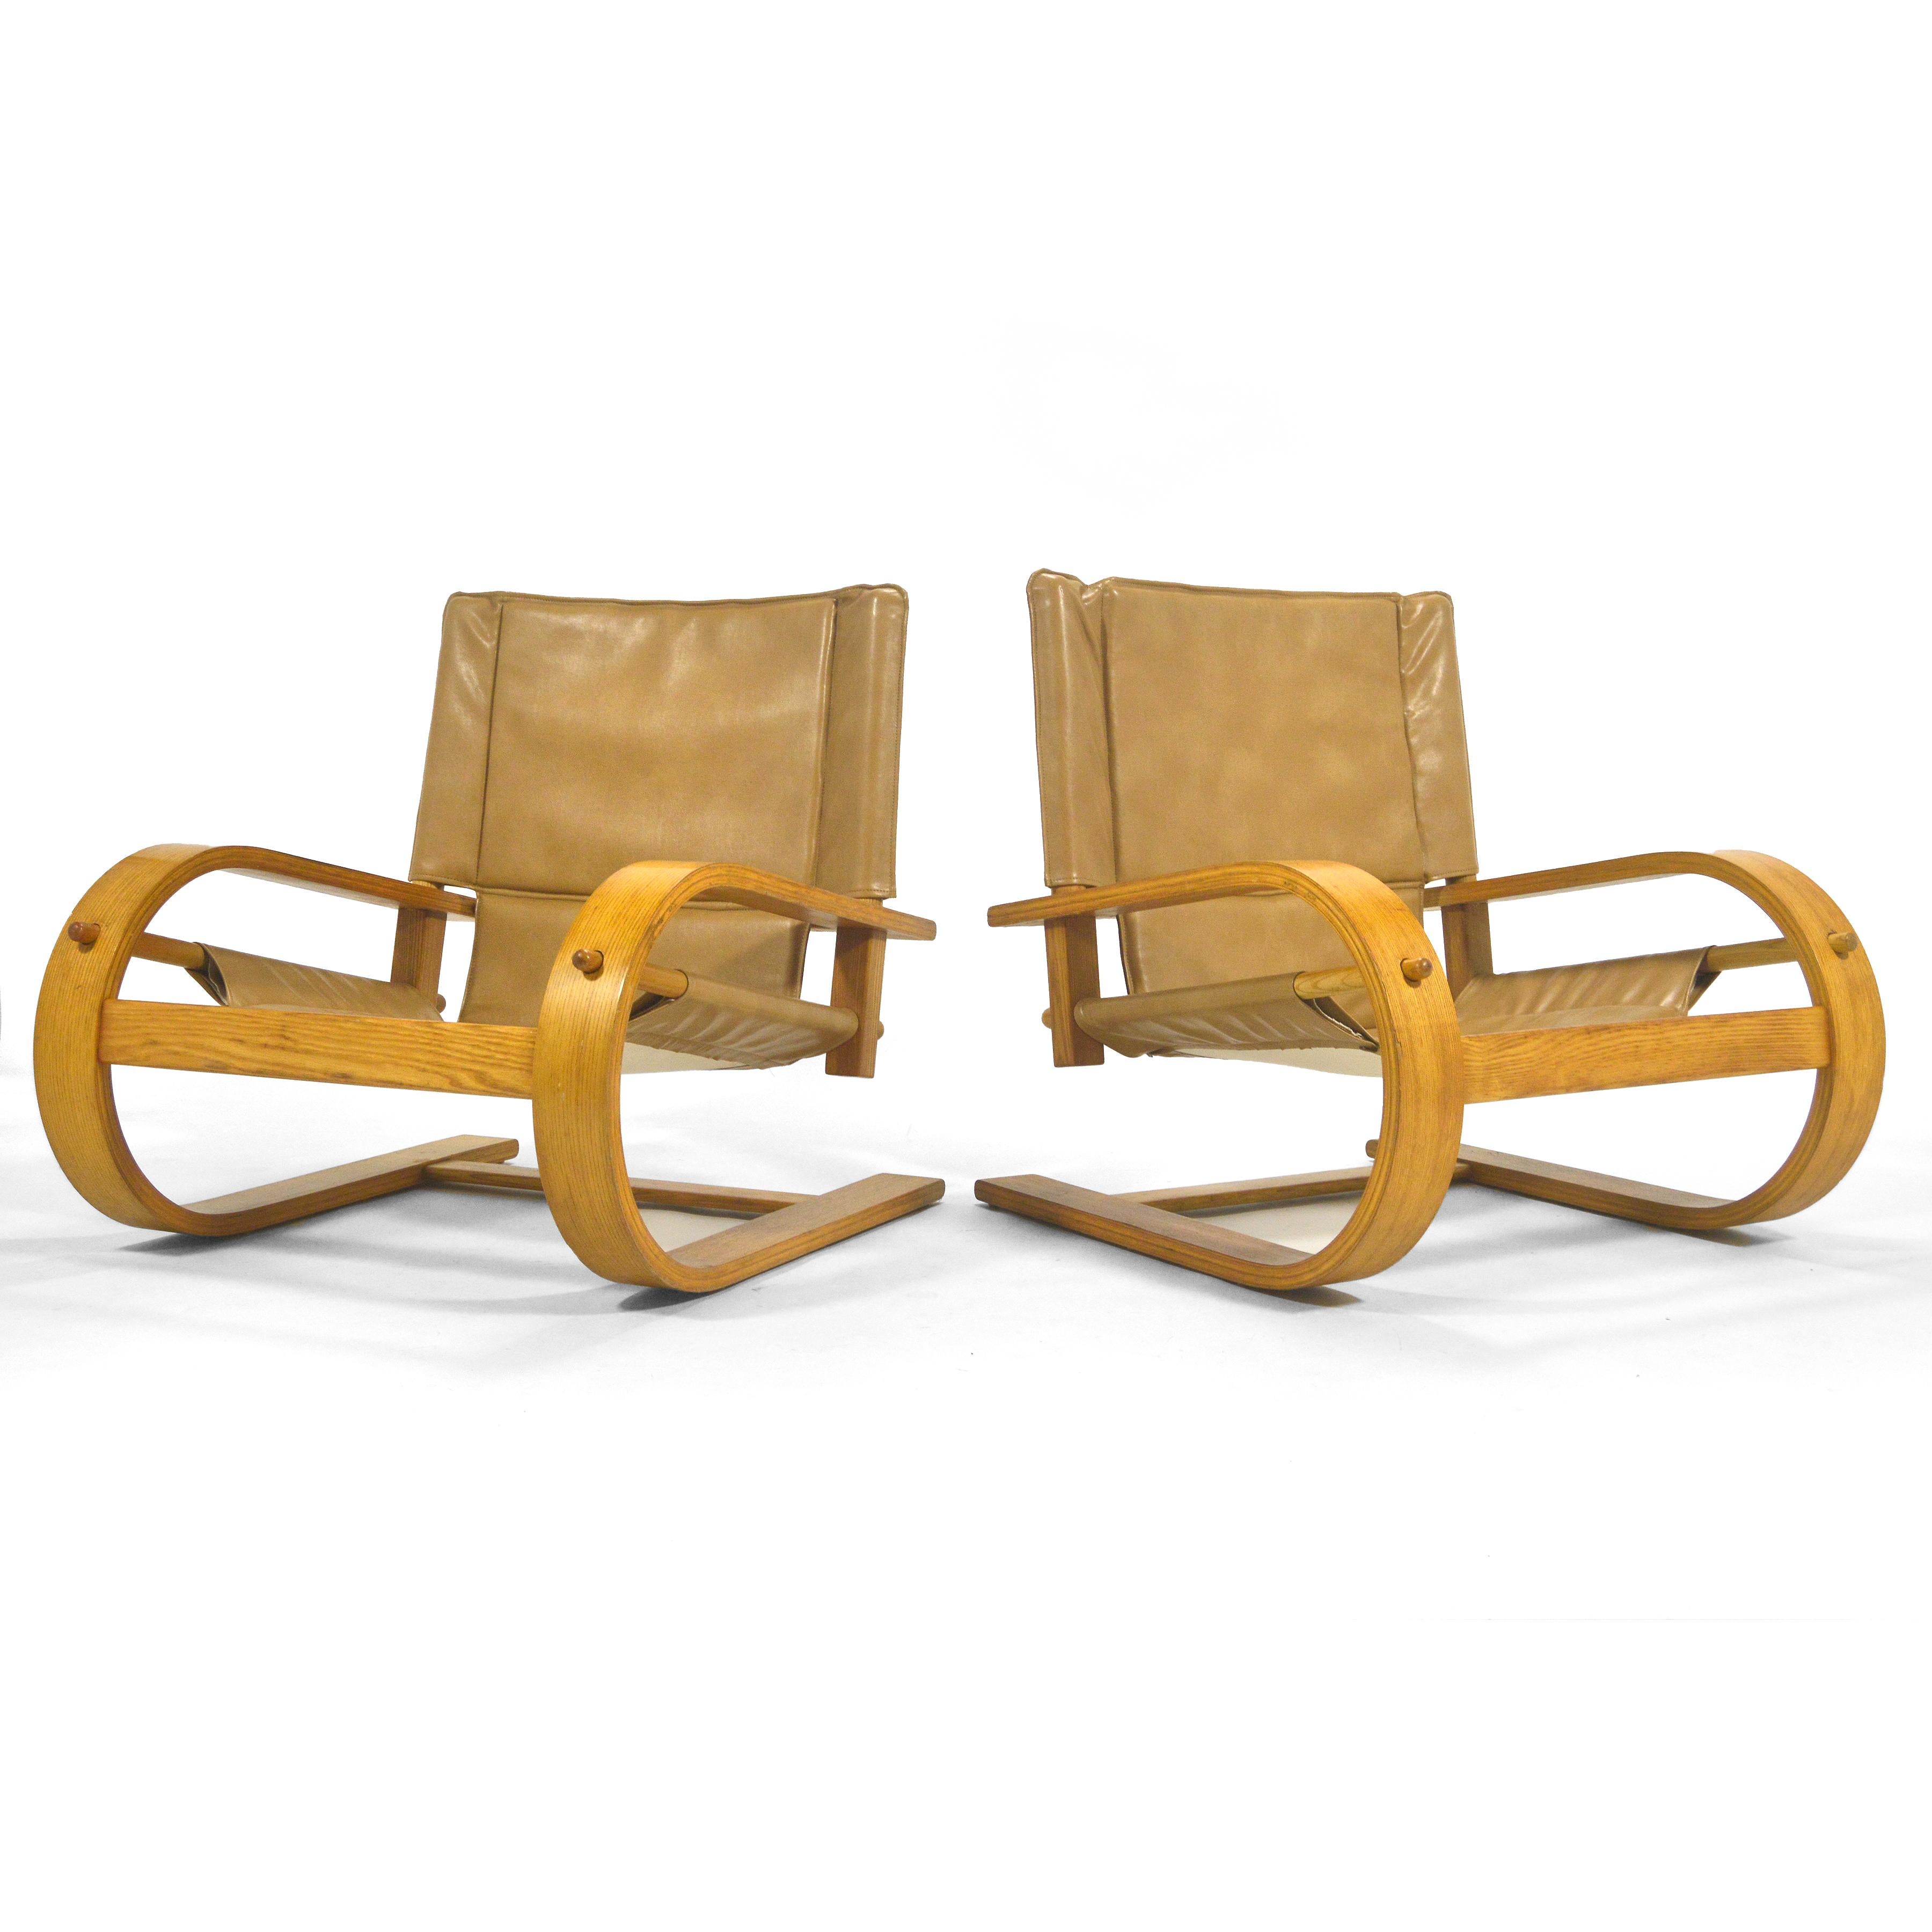 Designed by Gionathan de Pas, Donato D’Urbino and Paolo Lomazzi in 1976 for Poltronova, these generous lounge chairs have cantileviered frames of laminiated wood reminicent of Aalto that support a leather sling seat.